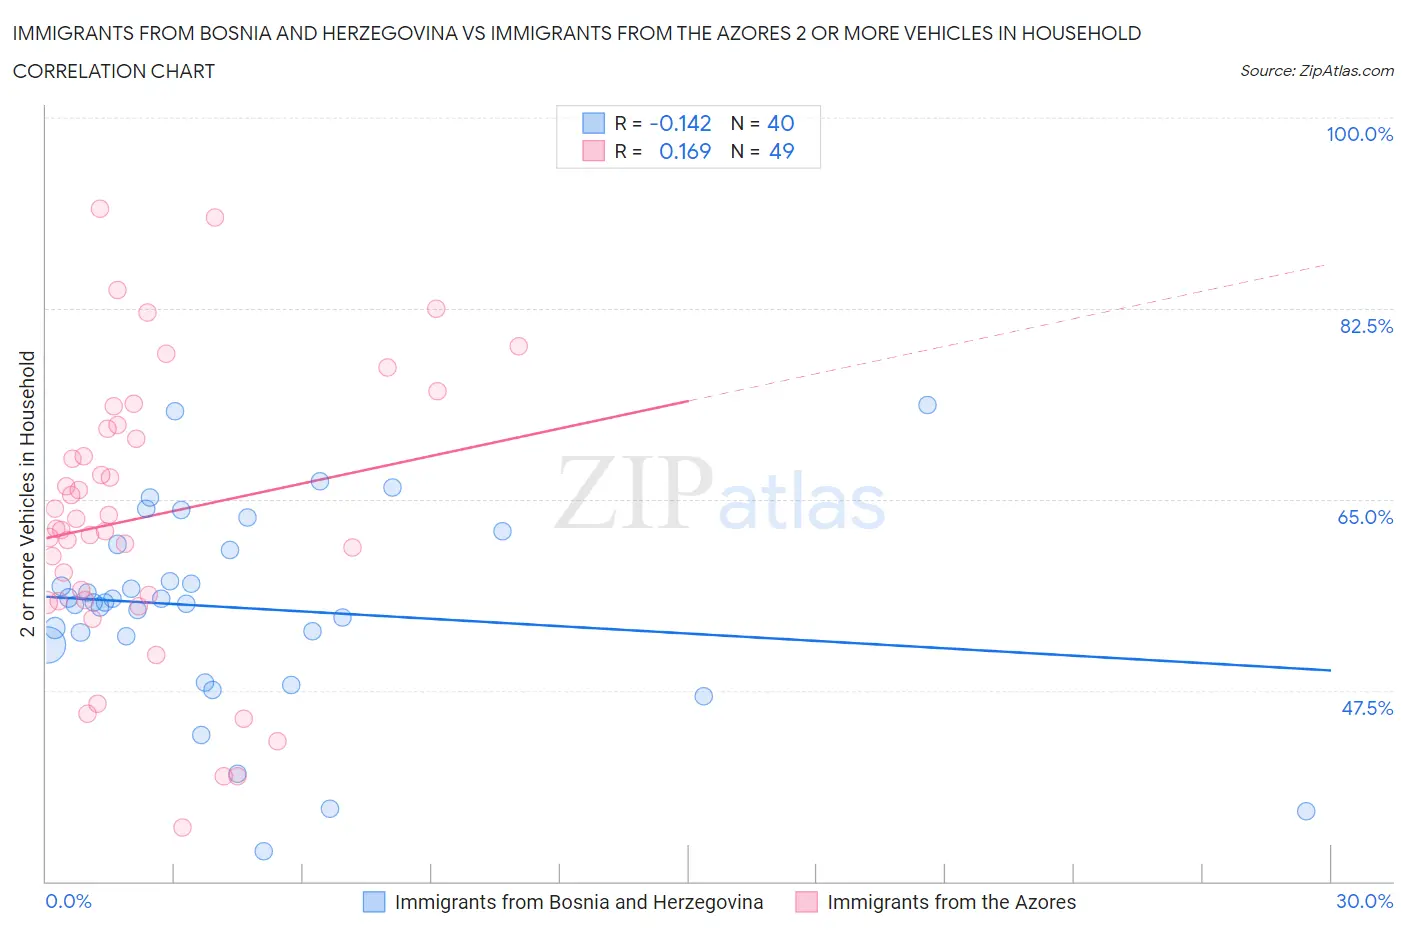 Immigrants from Bosnia and Herzegovina vs Immigrants from the Azores 2 or more Vehicles in Household